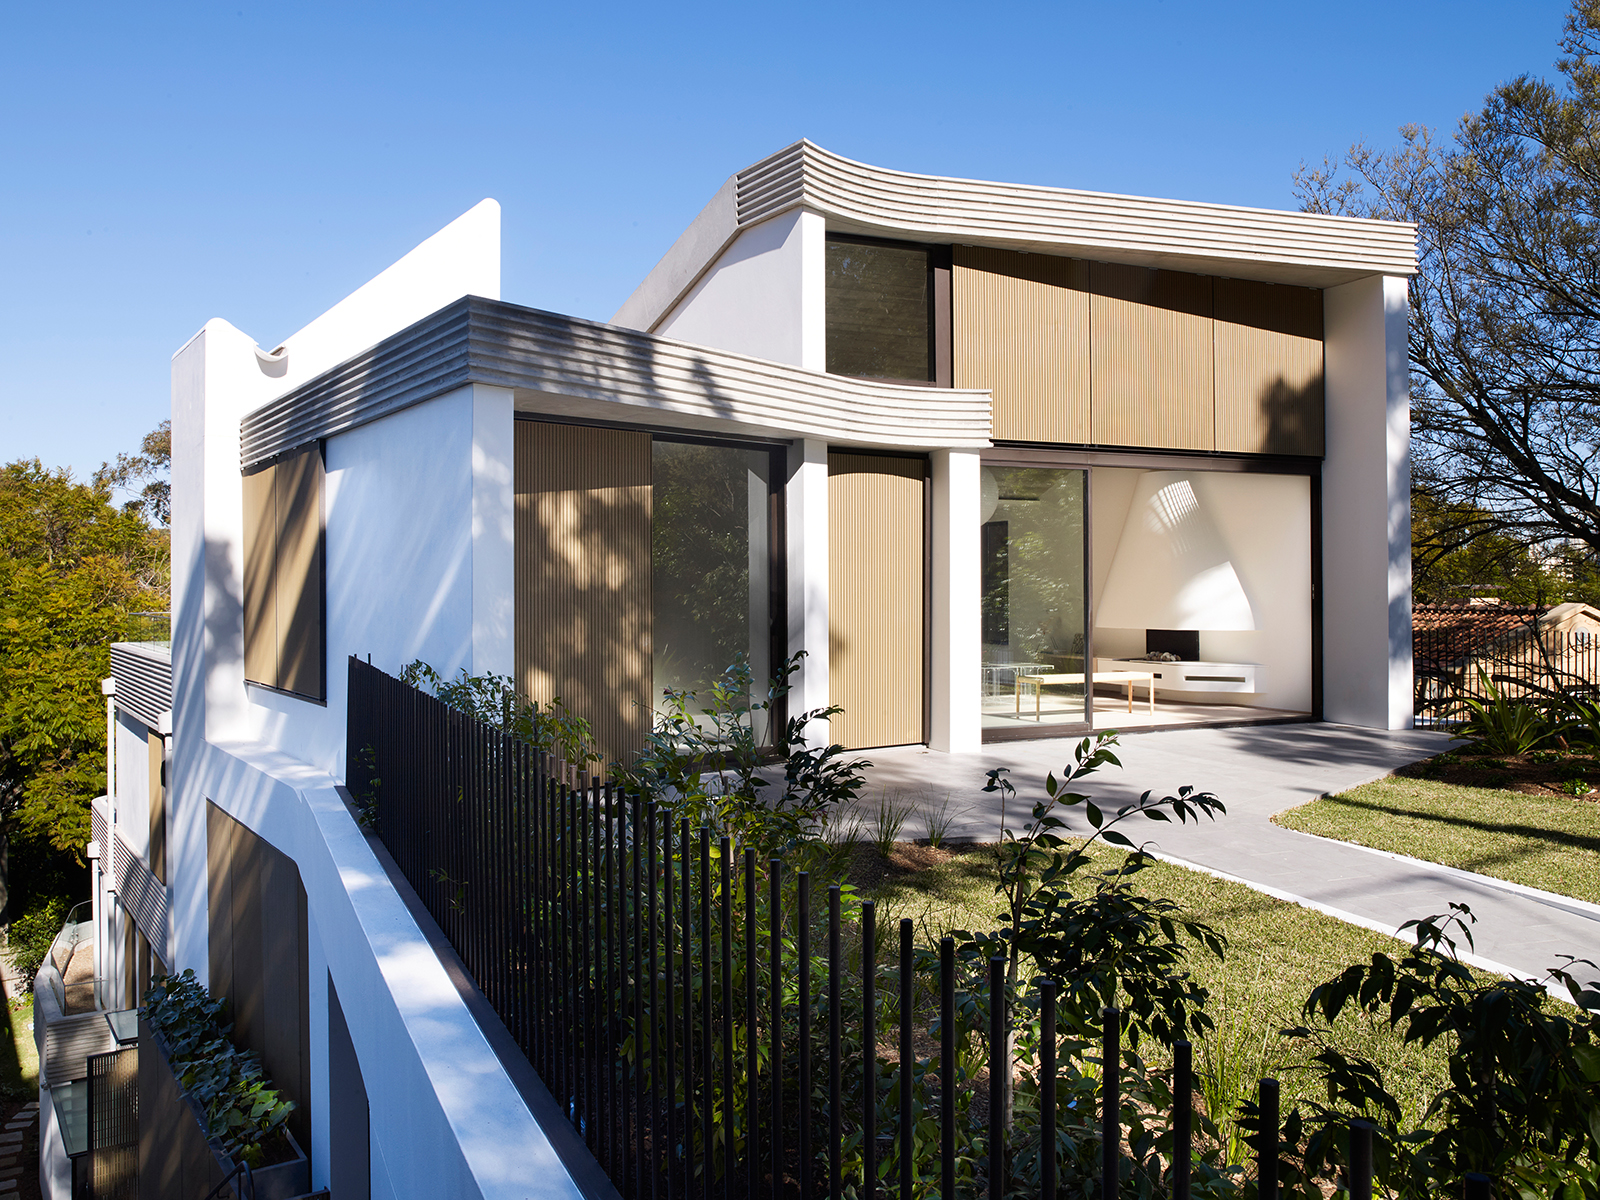 The Triplex Apartments - Stepped Residences on a Steep Hill by Luigi Rosselli Architects, Sydney, Australia